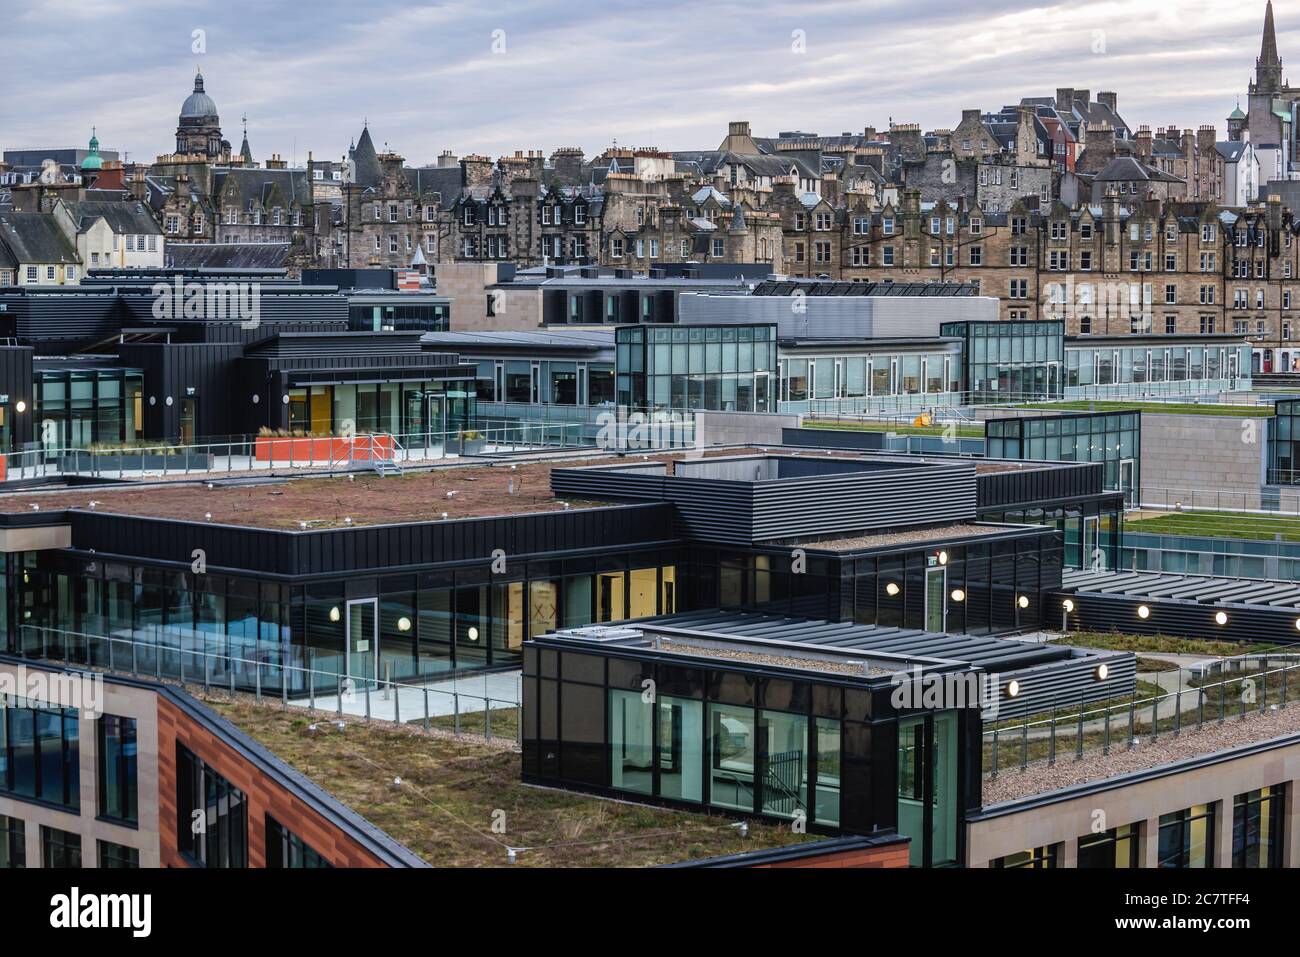 Modern and old architecture in Edinburgh, the capital of Scotland, part of United Kingdom Stock Photo